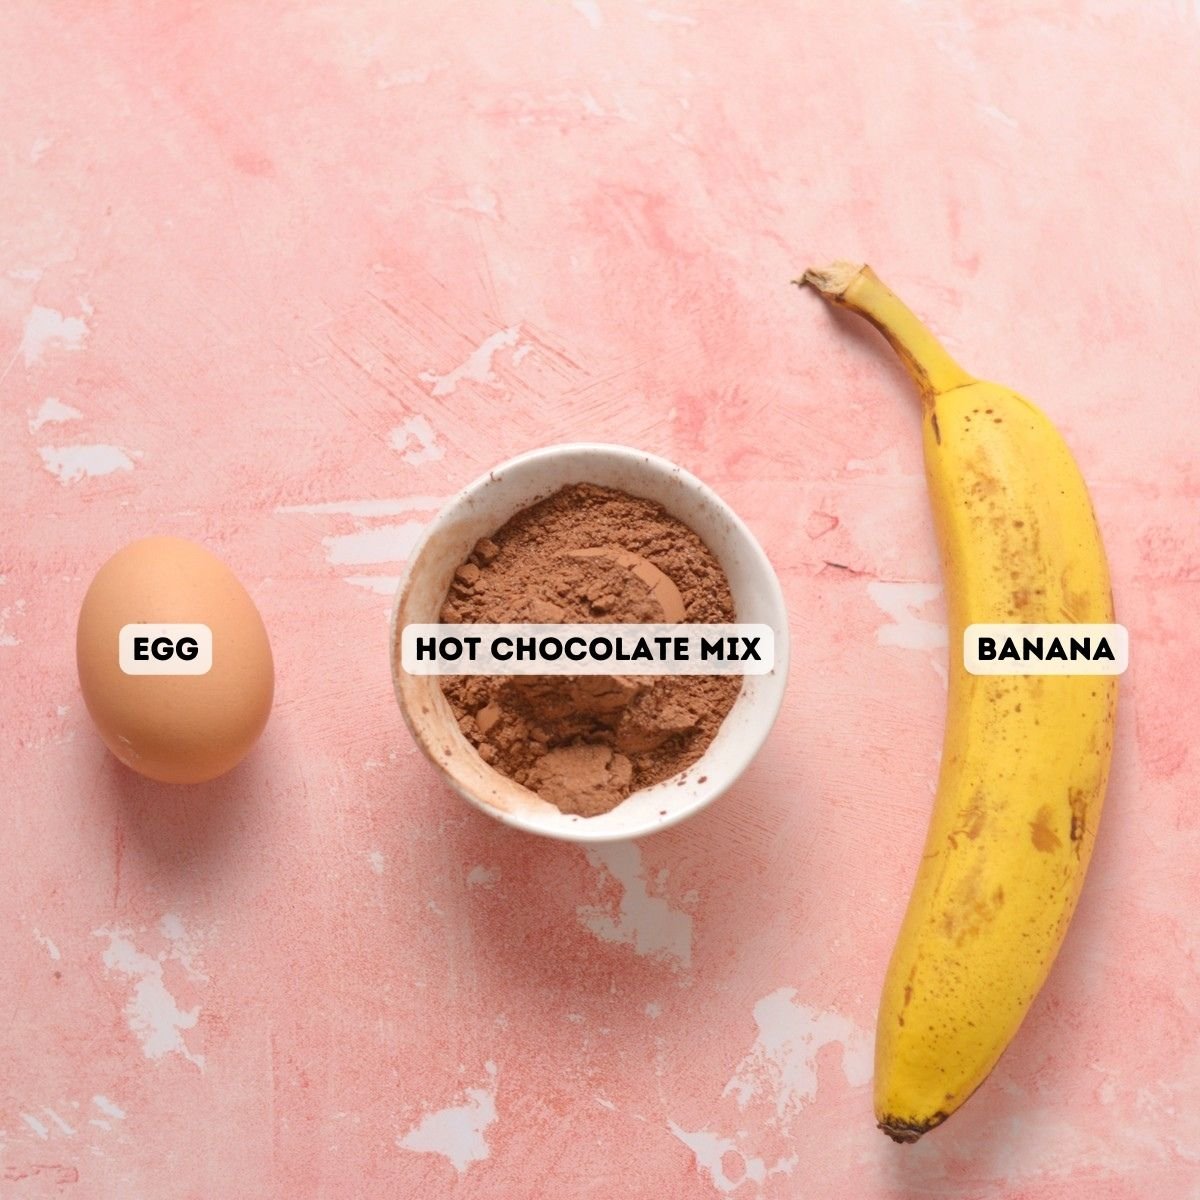 Ingredients including banana, egg, and hot cocoa mix.